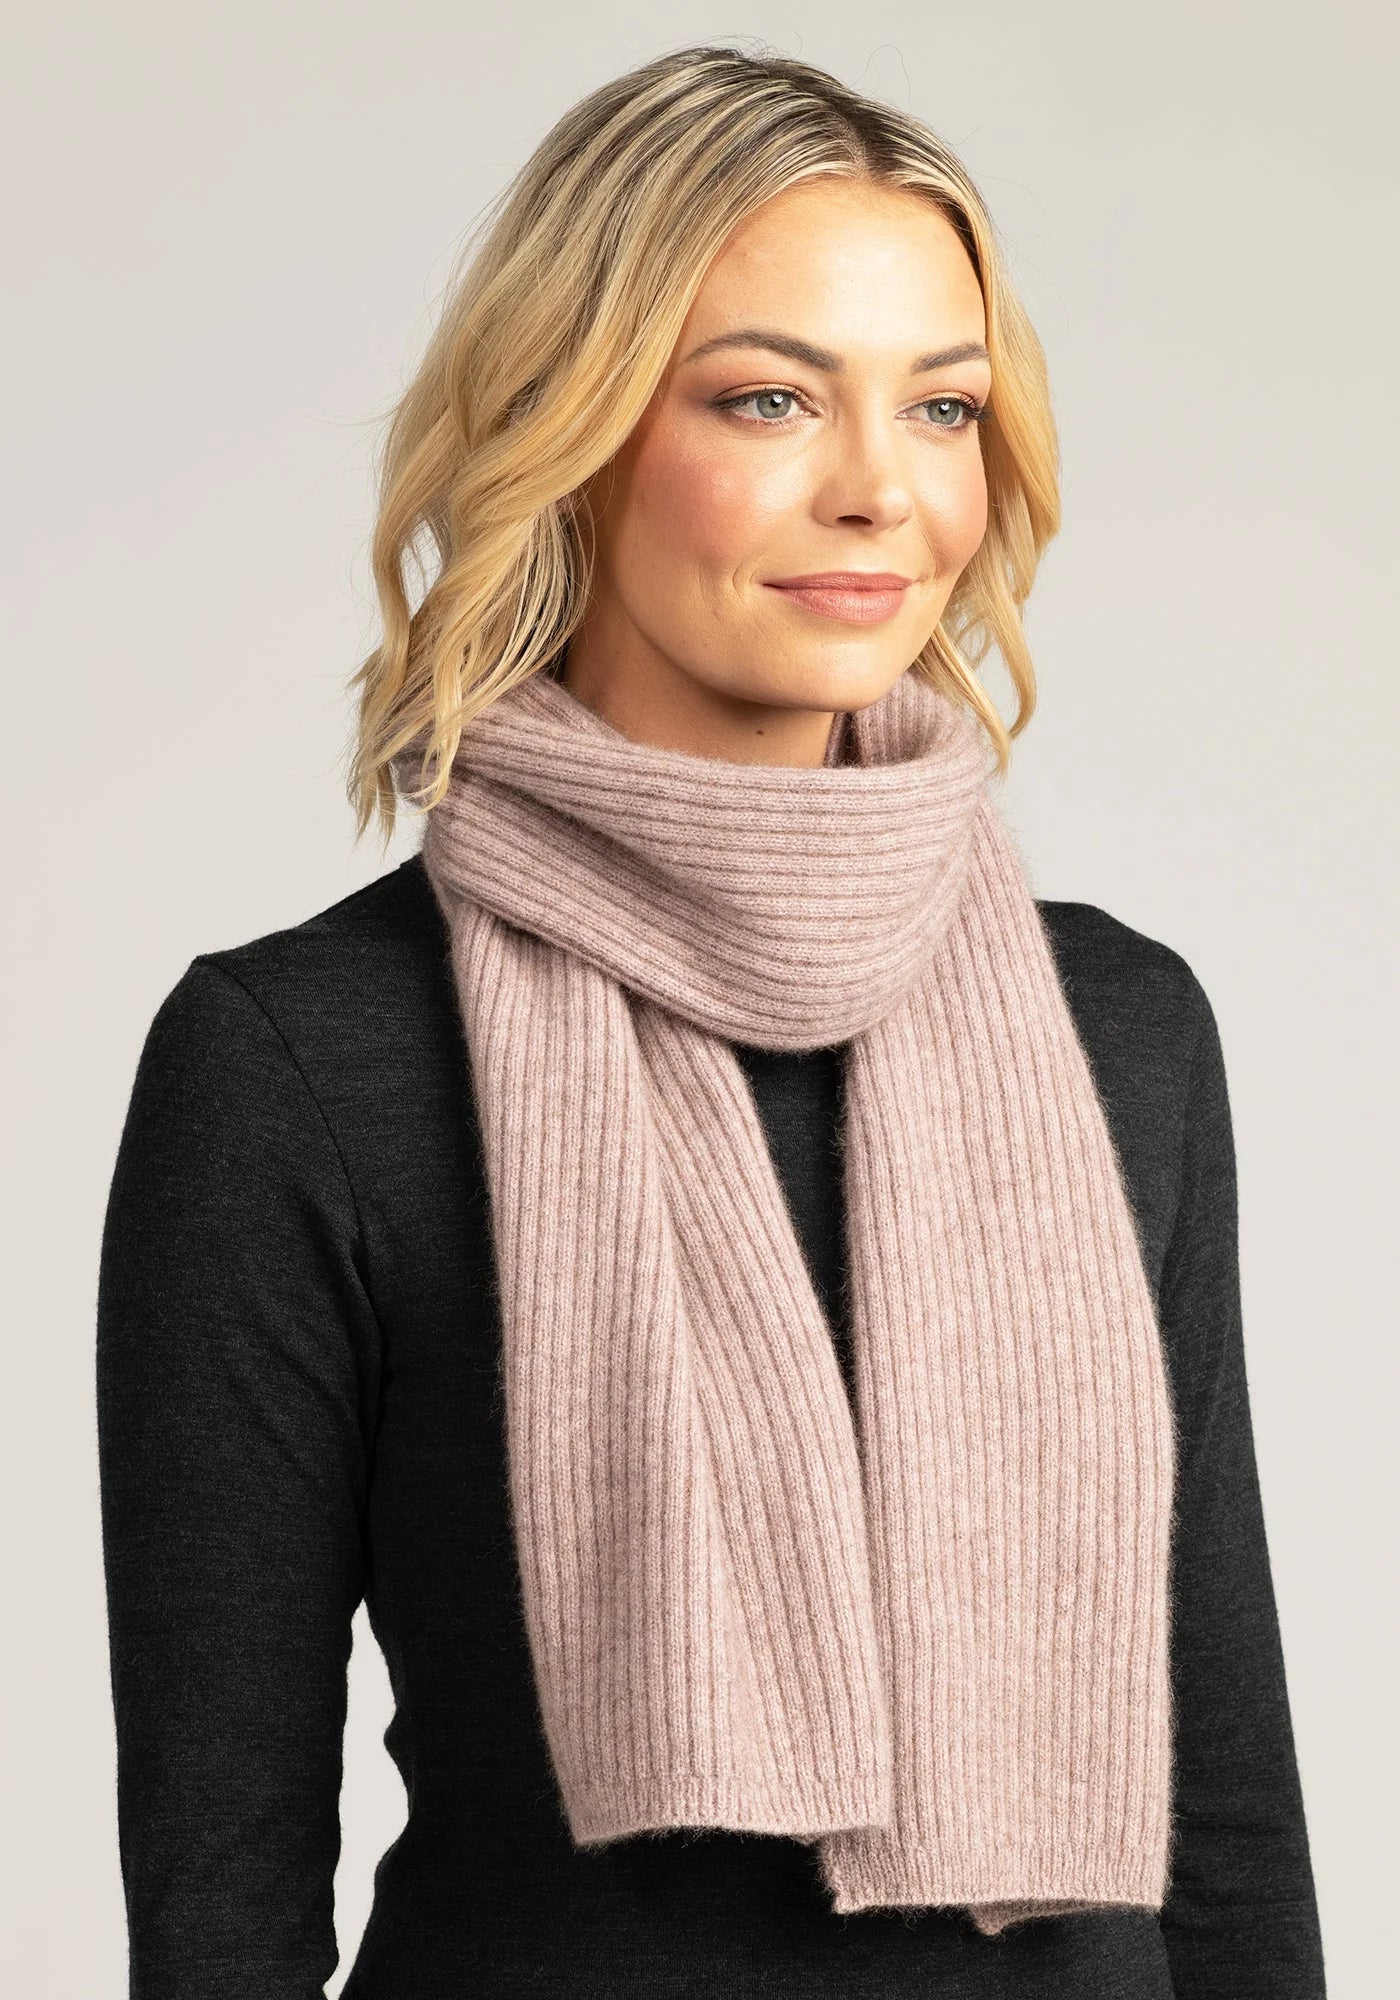 Stay warm in style with our light pink merino wool ribbed scarf. Soft, breathable, and irresistibly chic. Order now!